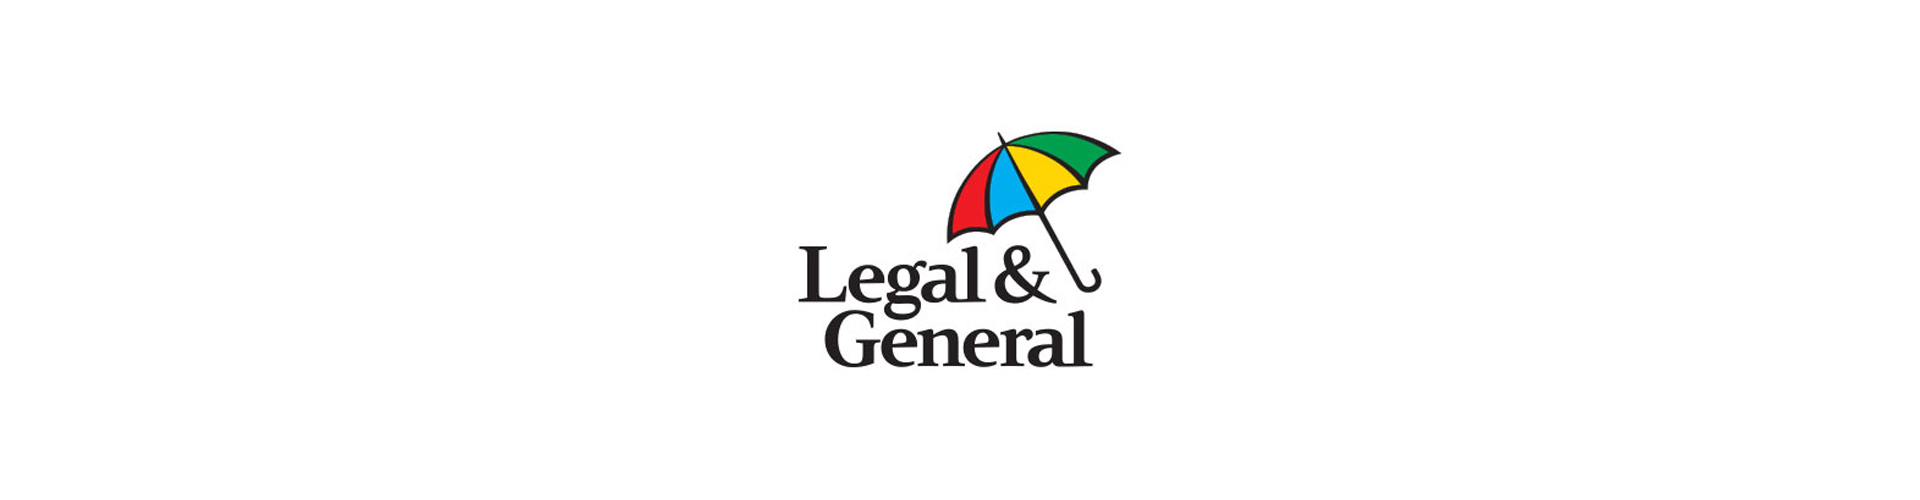 Legal and General Travel insurance_logo